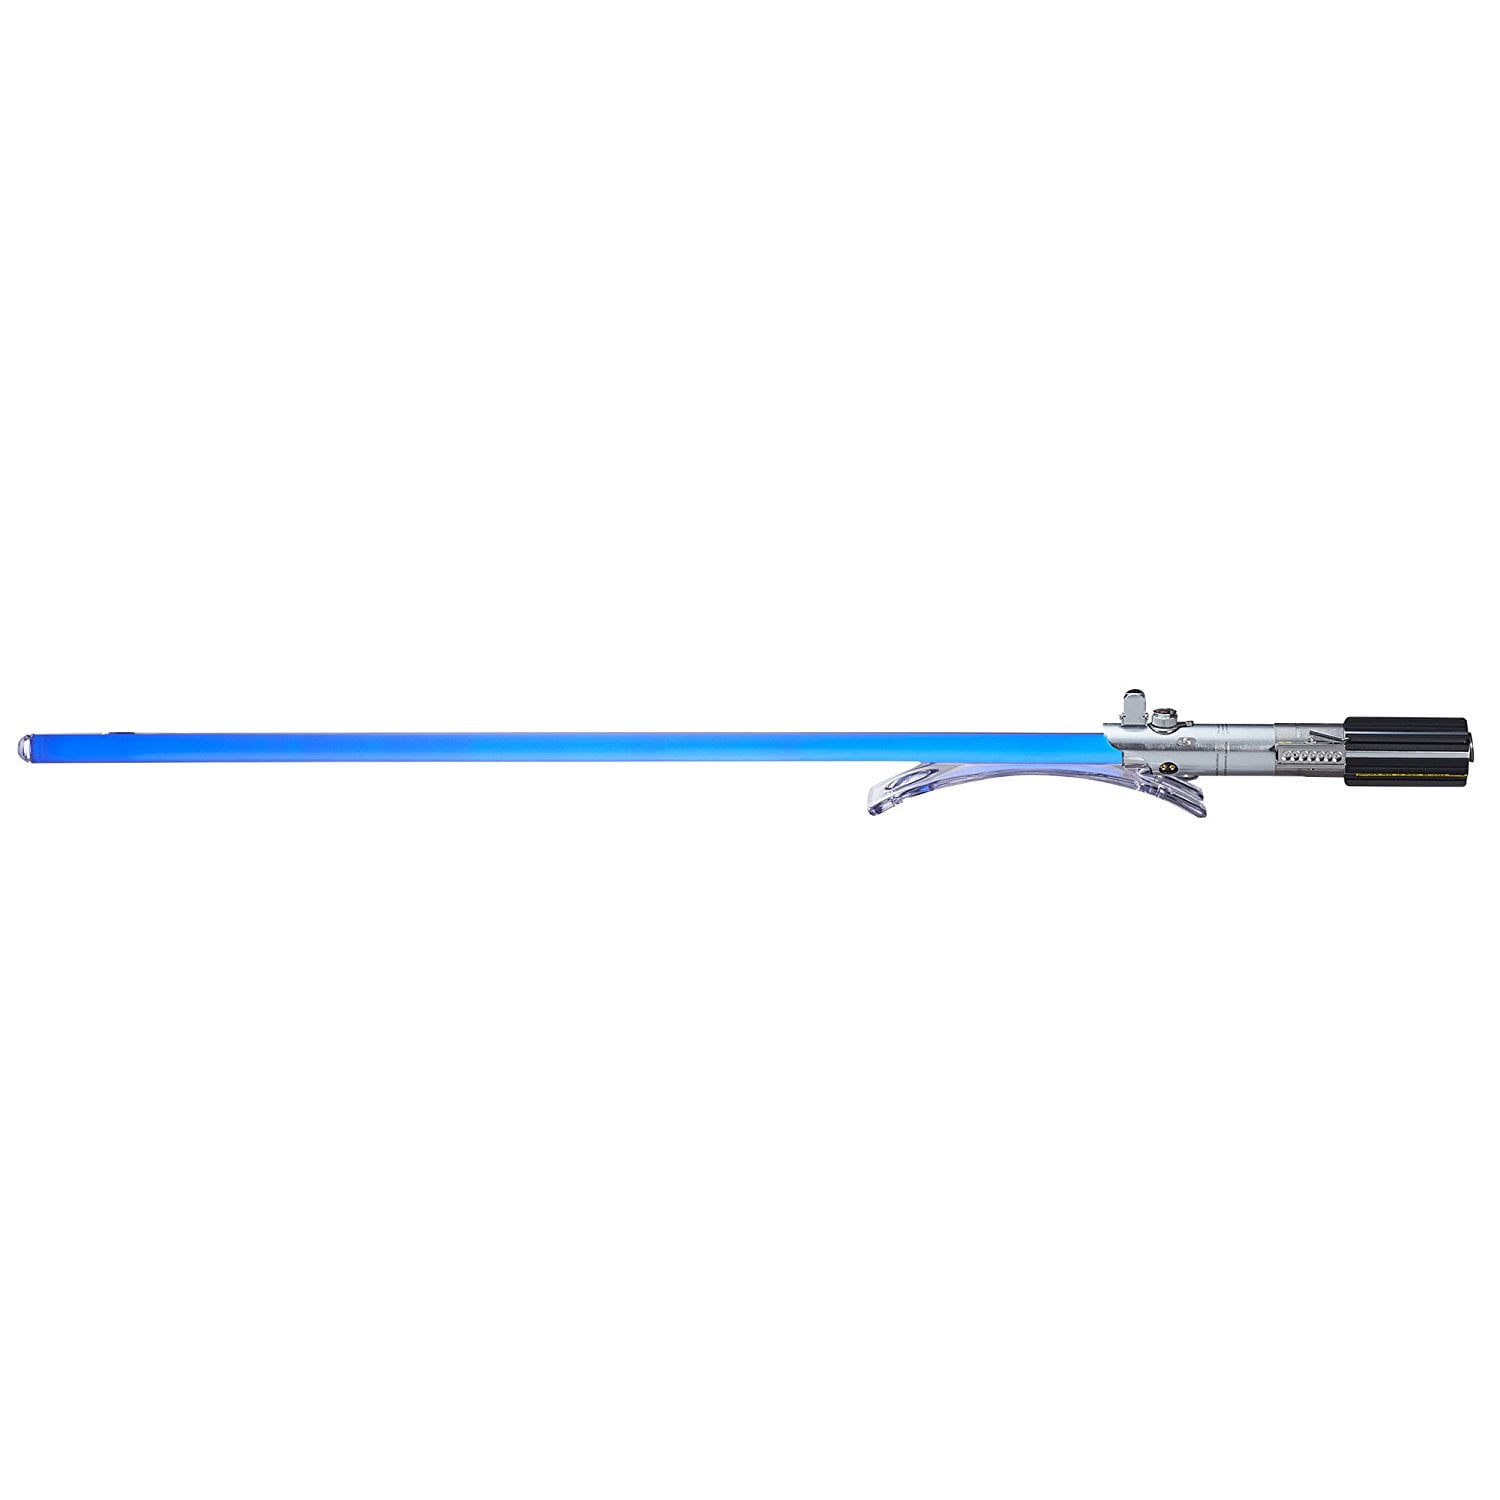 Star Wars Rey (Jedi Training) Force Action Electronic Lightsaber 